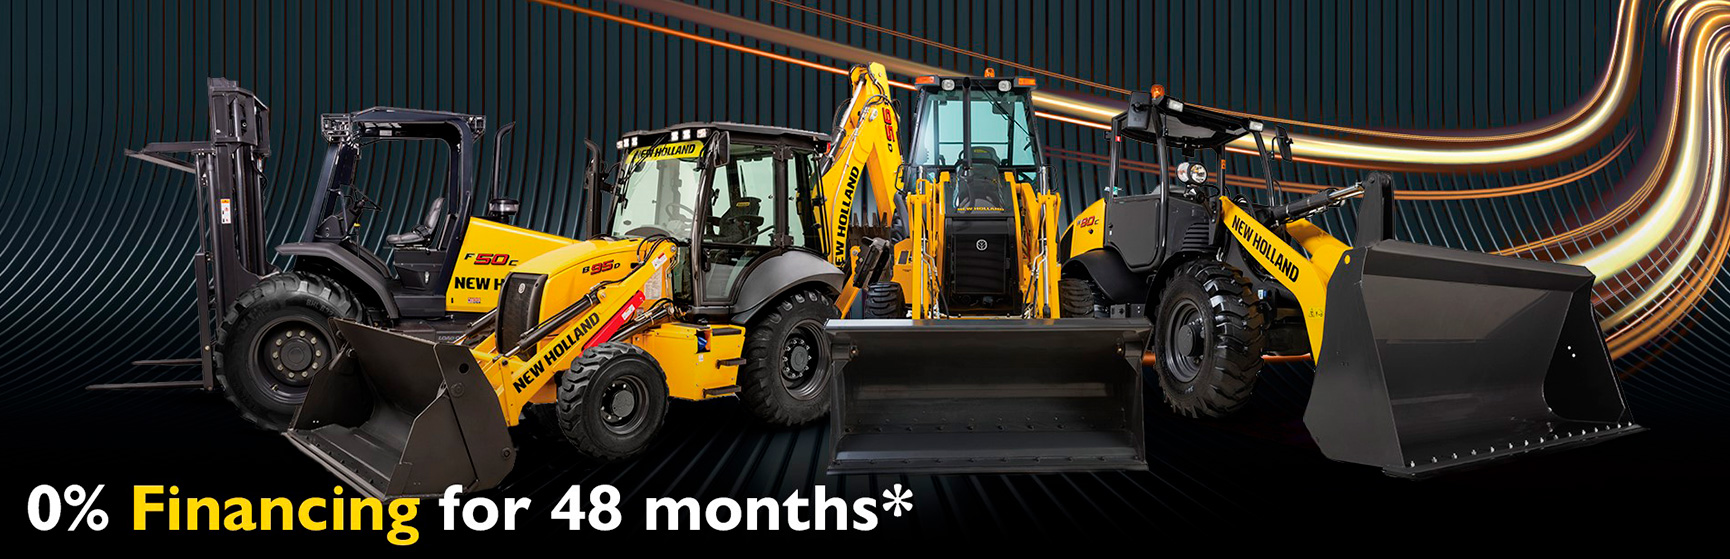 New Holland Regional Promotions